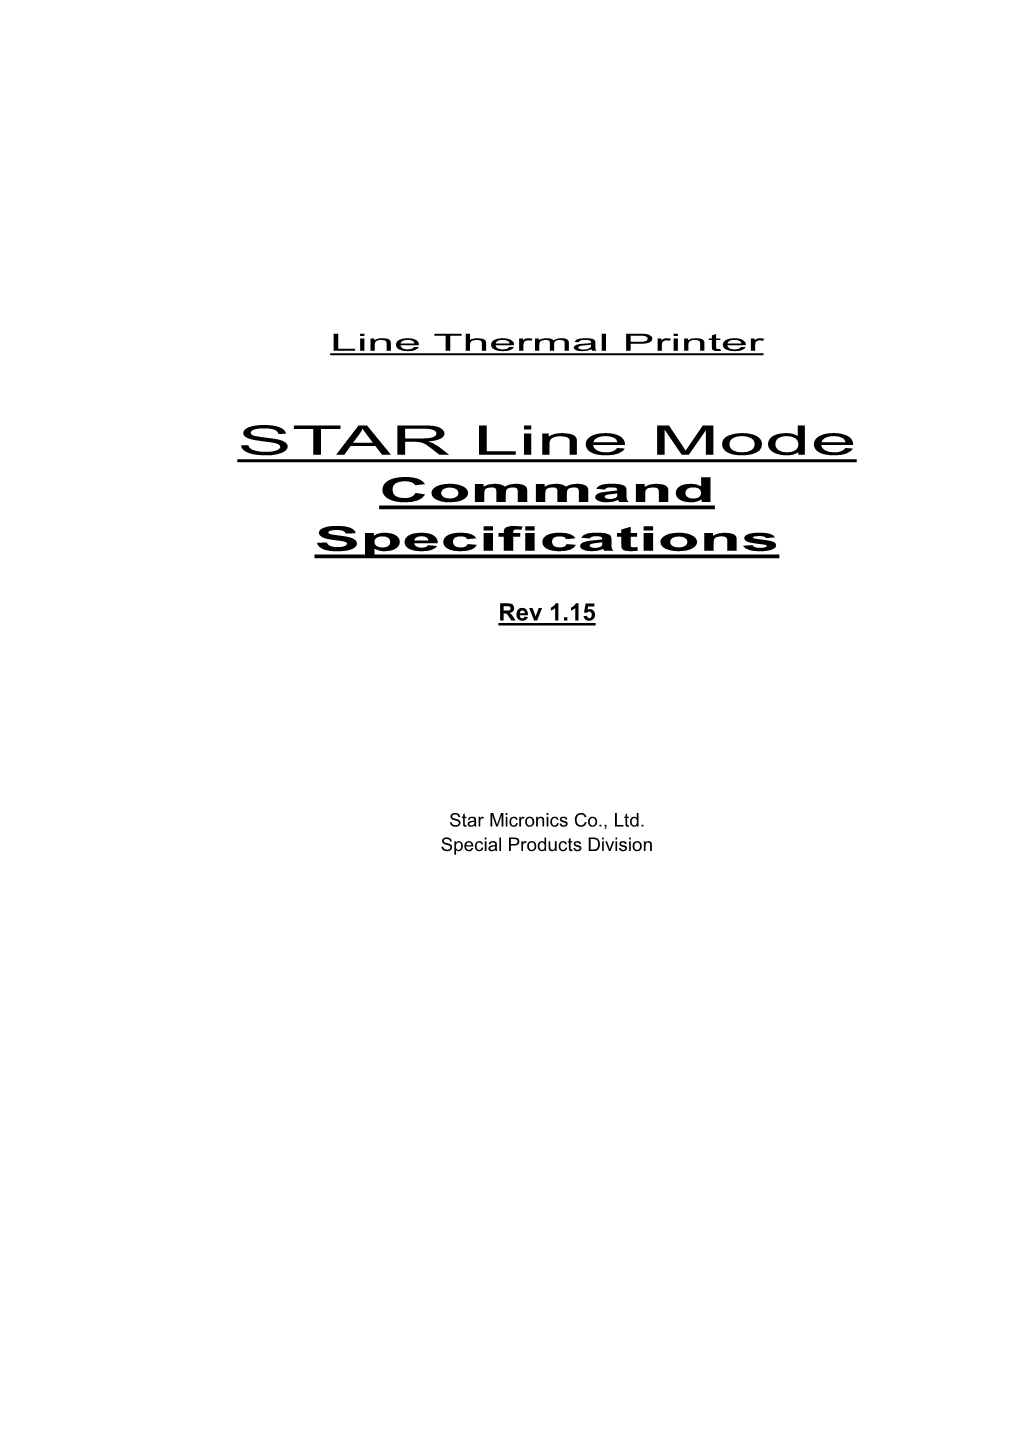 Line Thermal Printer STAR Line Mode Command Specifications